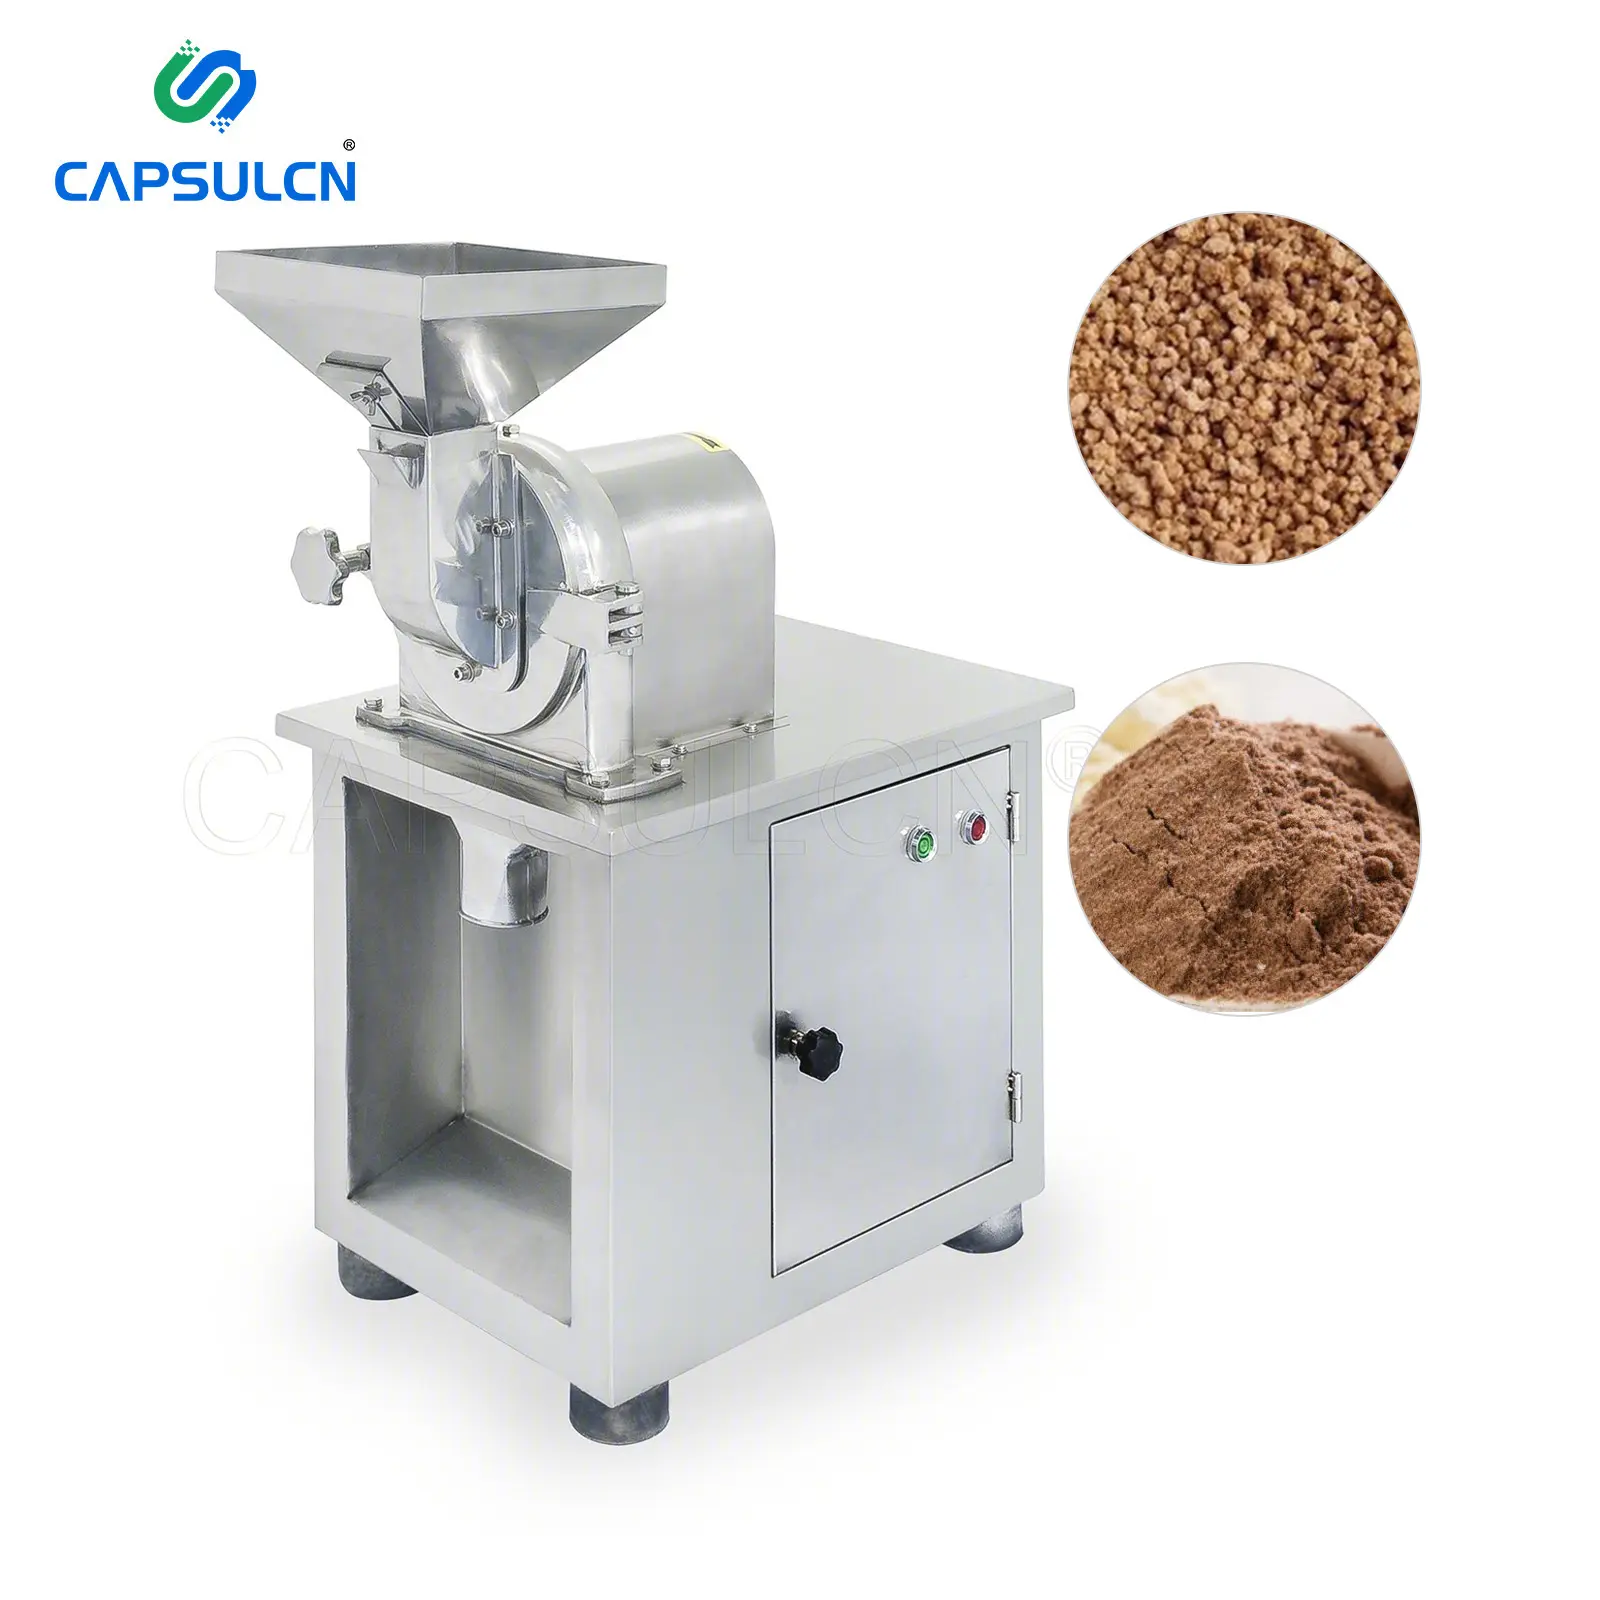 SF-180 Industrial Automatic Mill Grinder Chili Pulverizer Spice Powder Grinding Machine Chinese Medicinal Dry Herbs Grinding